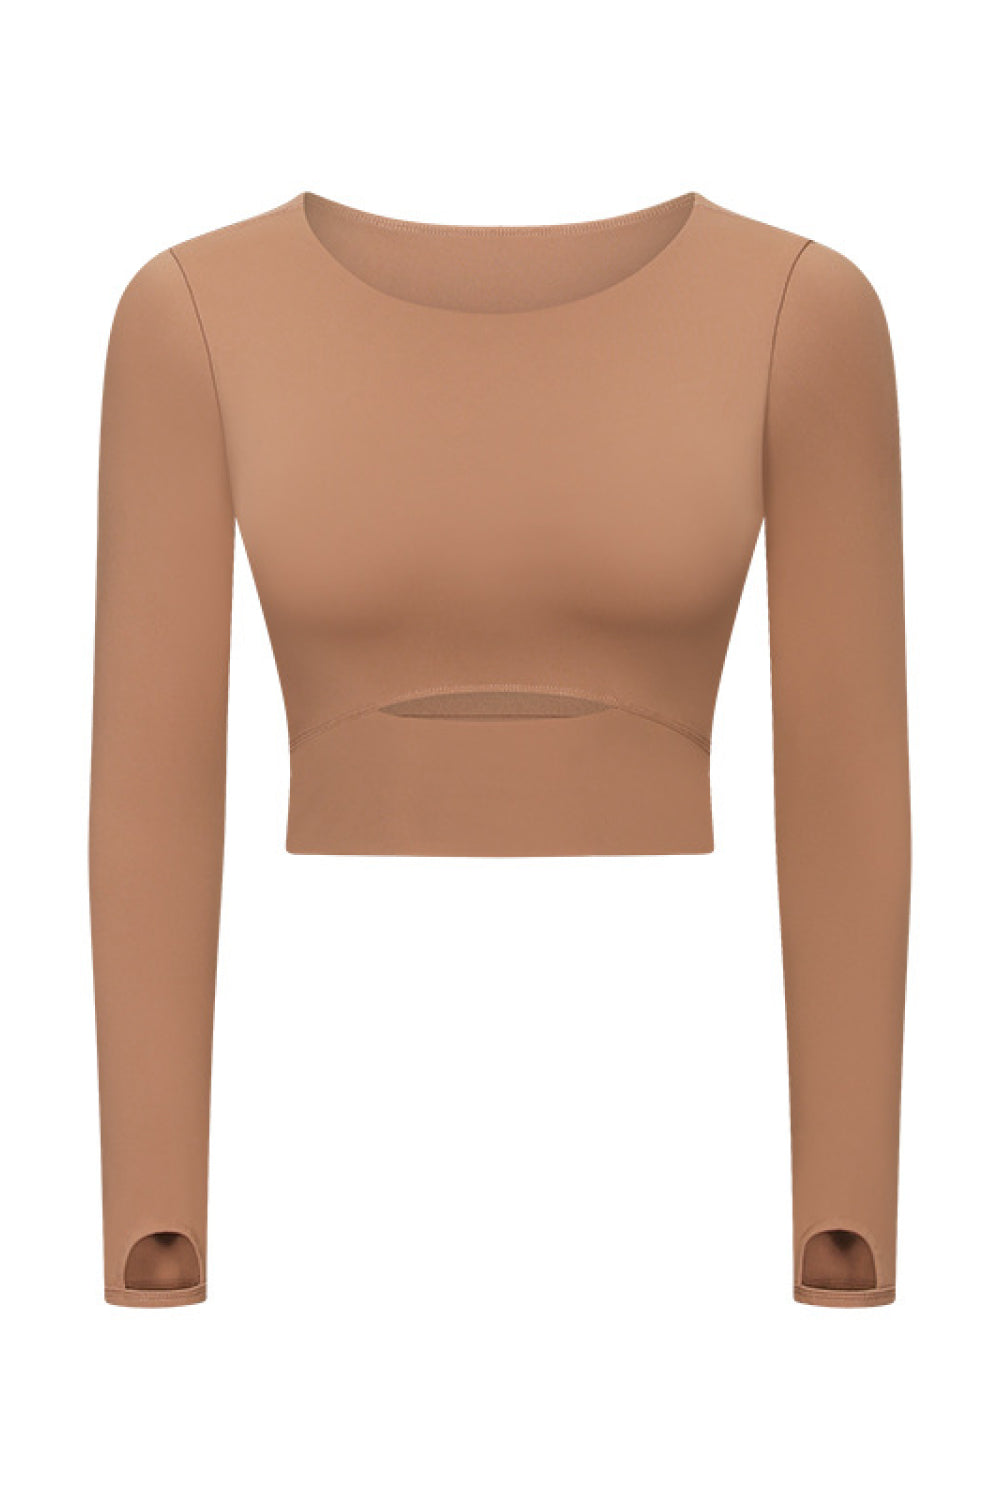 Rosy Brown Cut Out Front Crop Yoga Tee Sentient Beauty Fashions Apparel &amp; Accessories